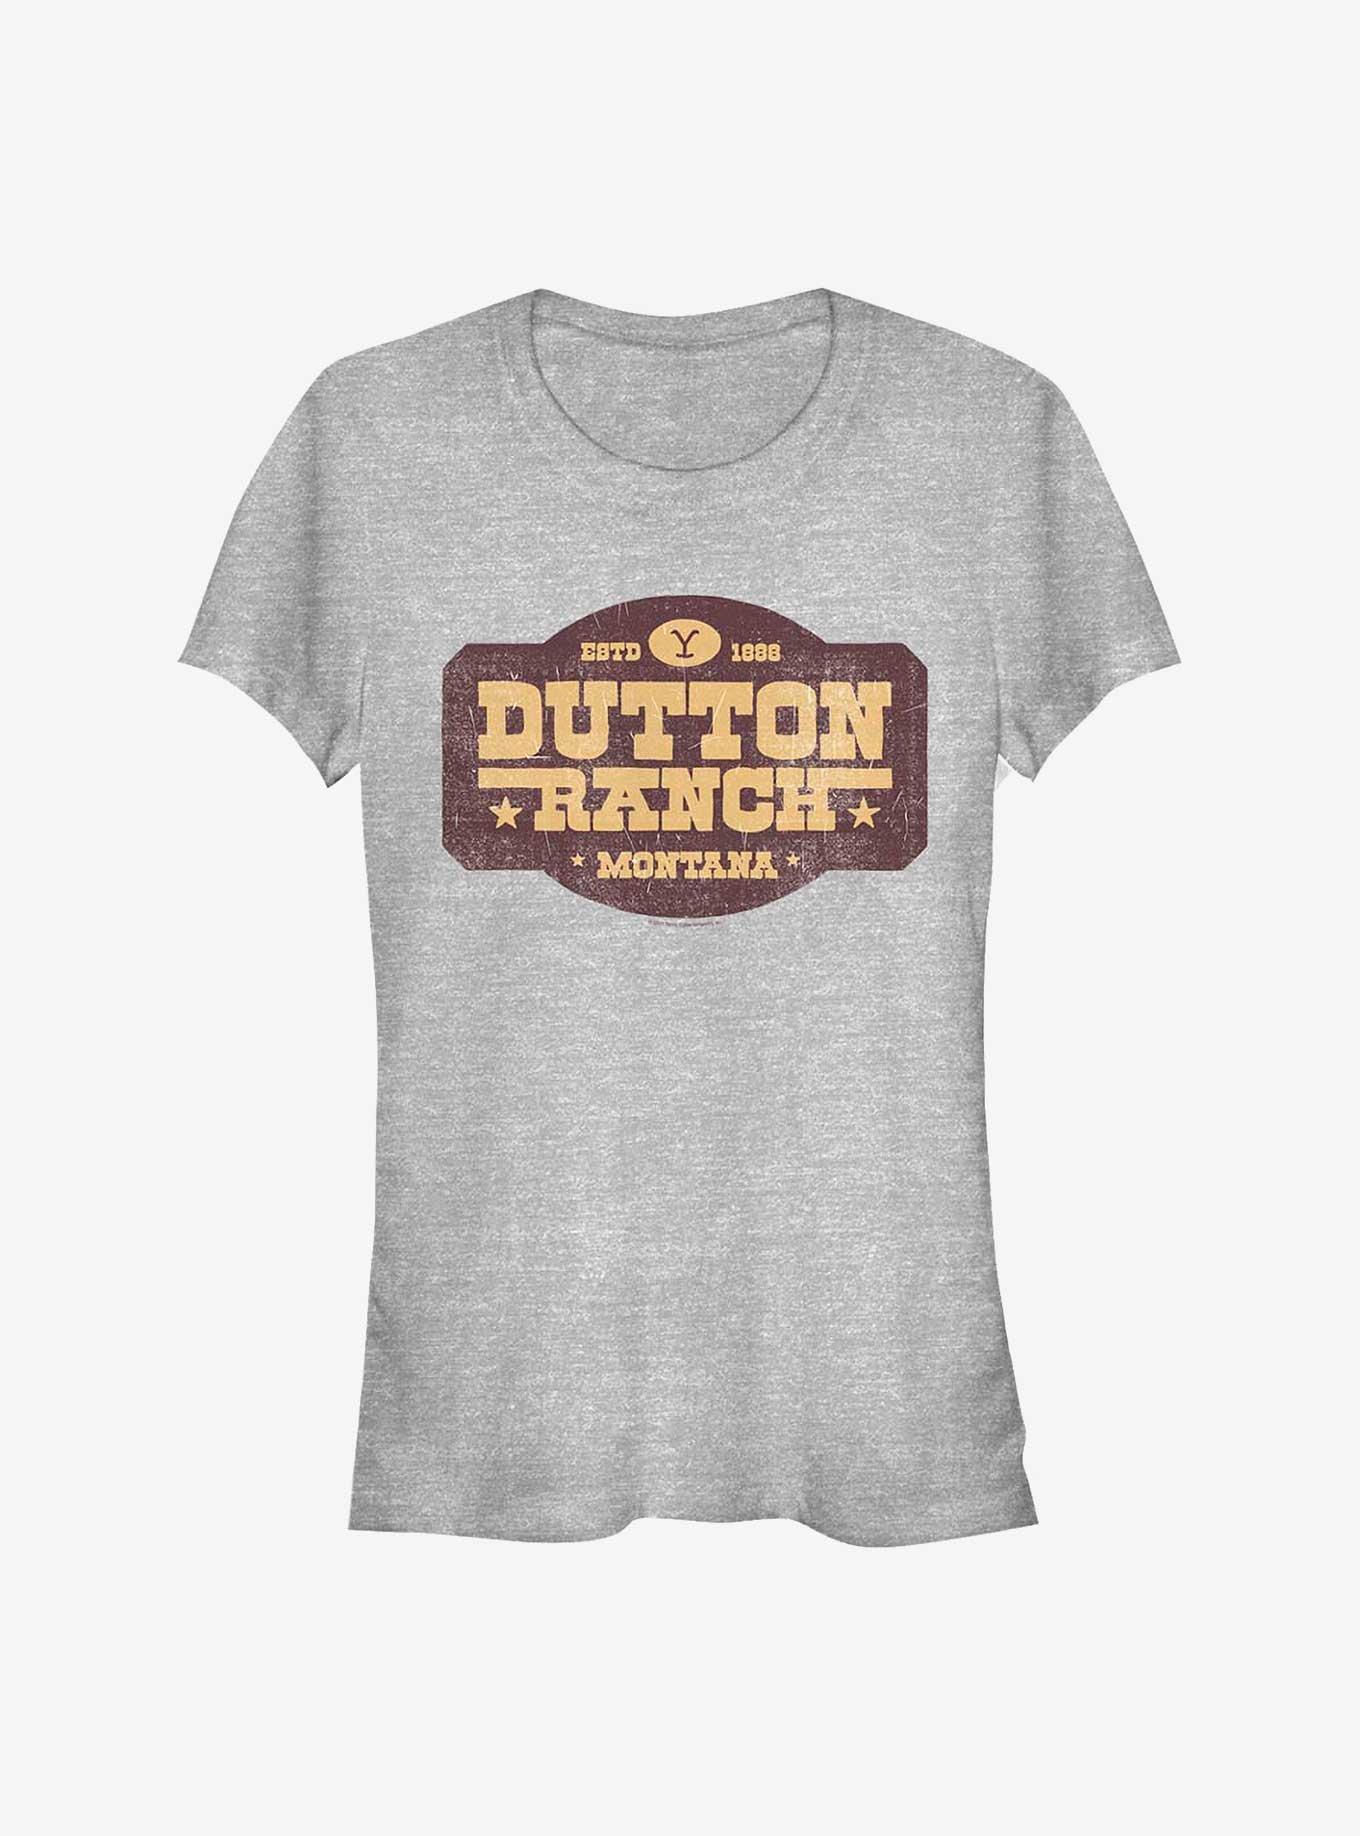 Yellowstone Dutton Ranch Distressed Sign Girls T-Shirt